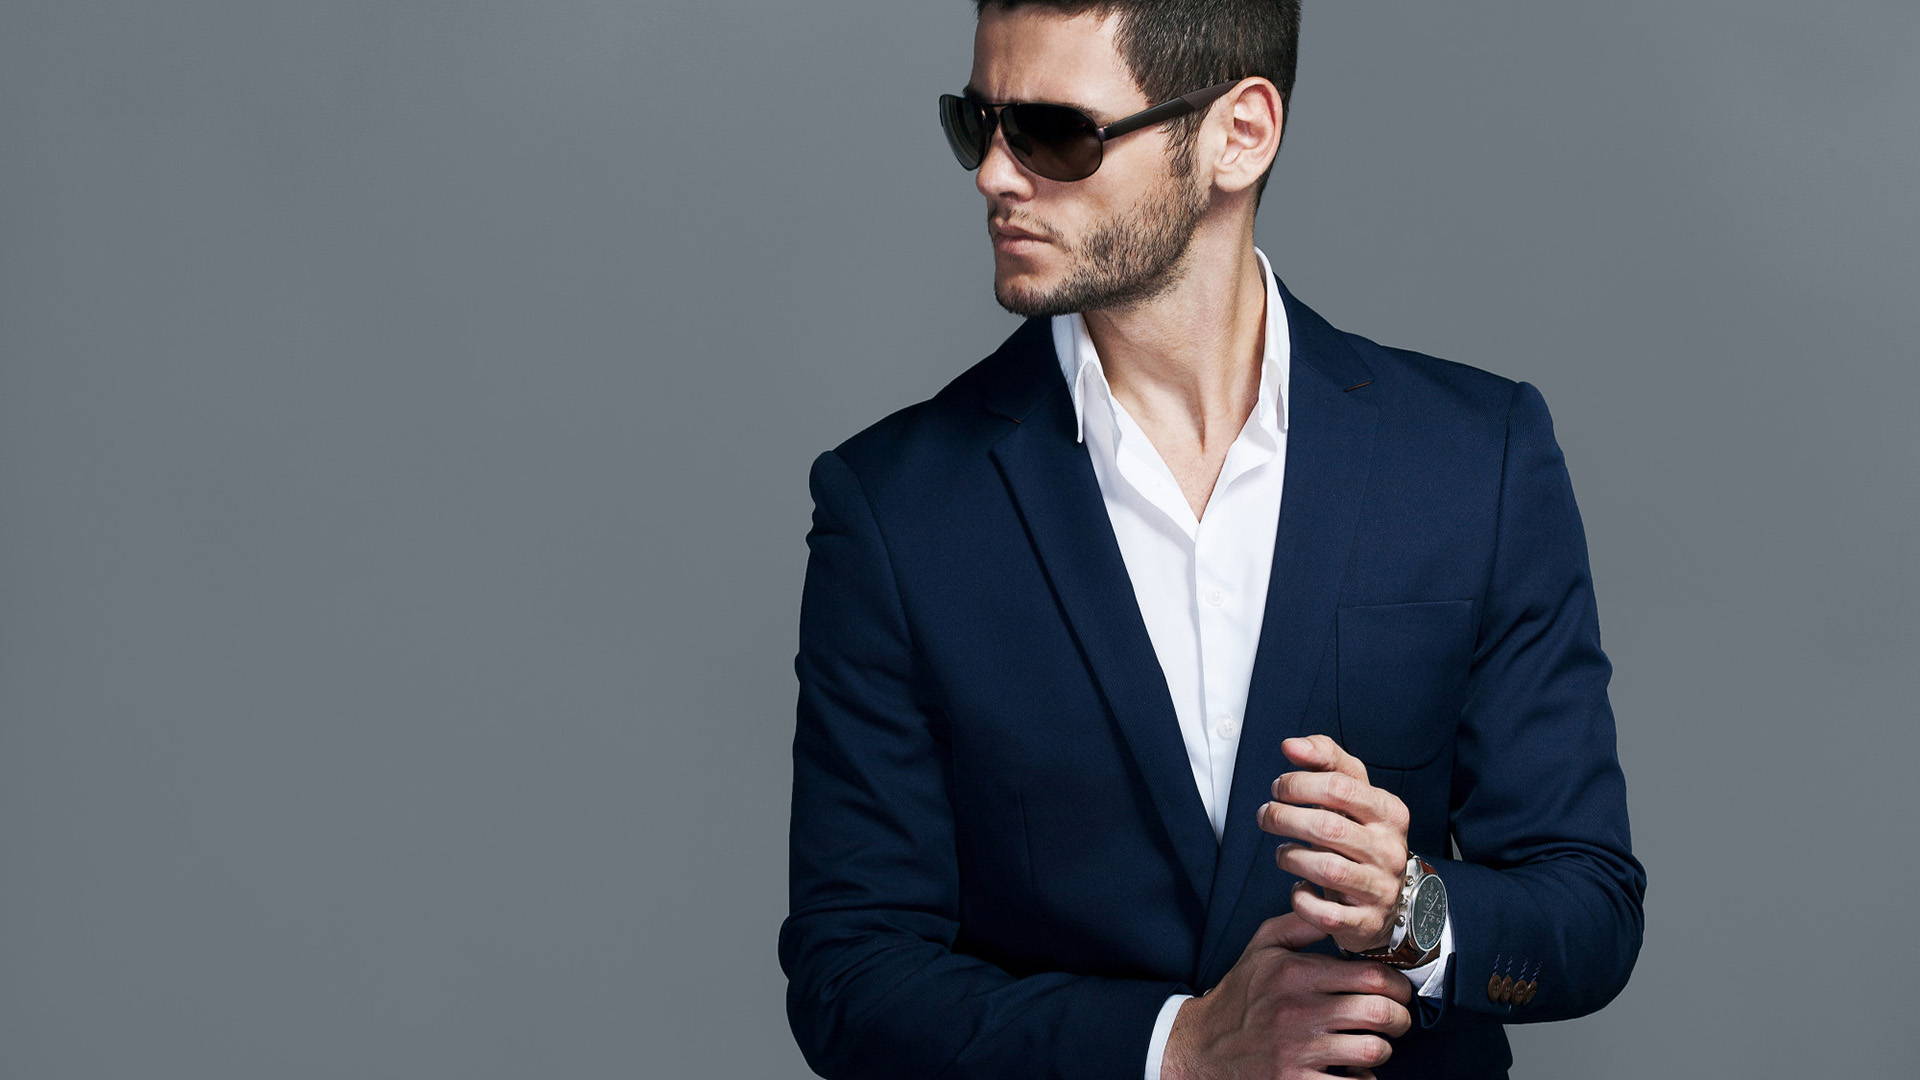 How to Dress Well: 9 Rules to Help You Go From Frumpy to Sharp